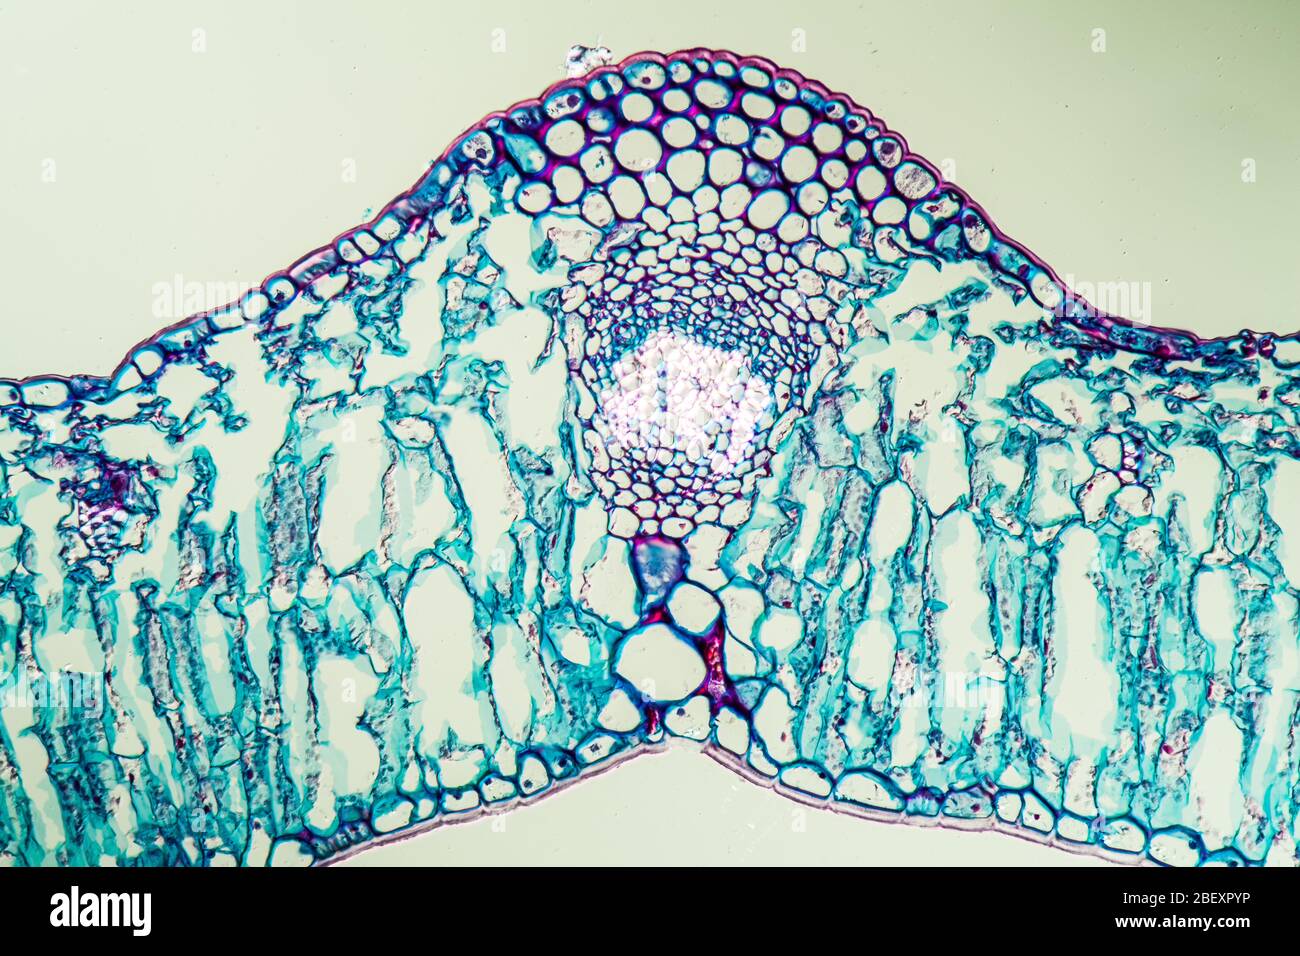 Linguster leaf cross section under the microscope 200x Stock Photo - Alamy